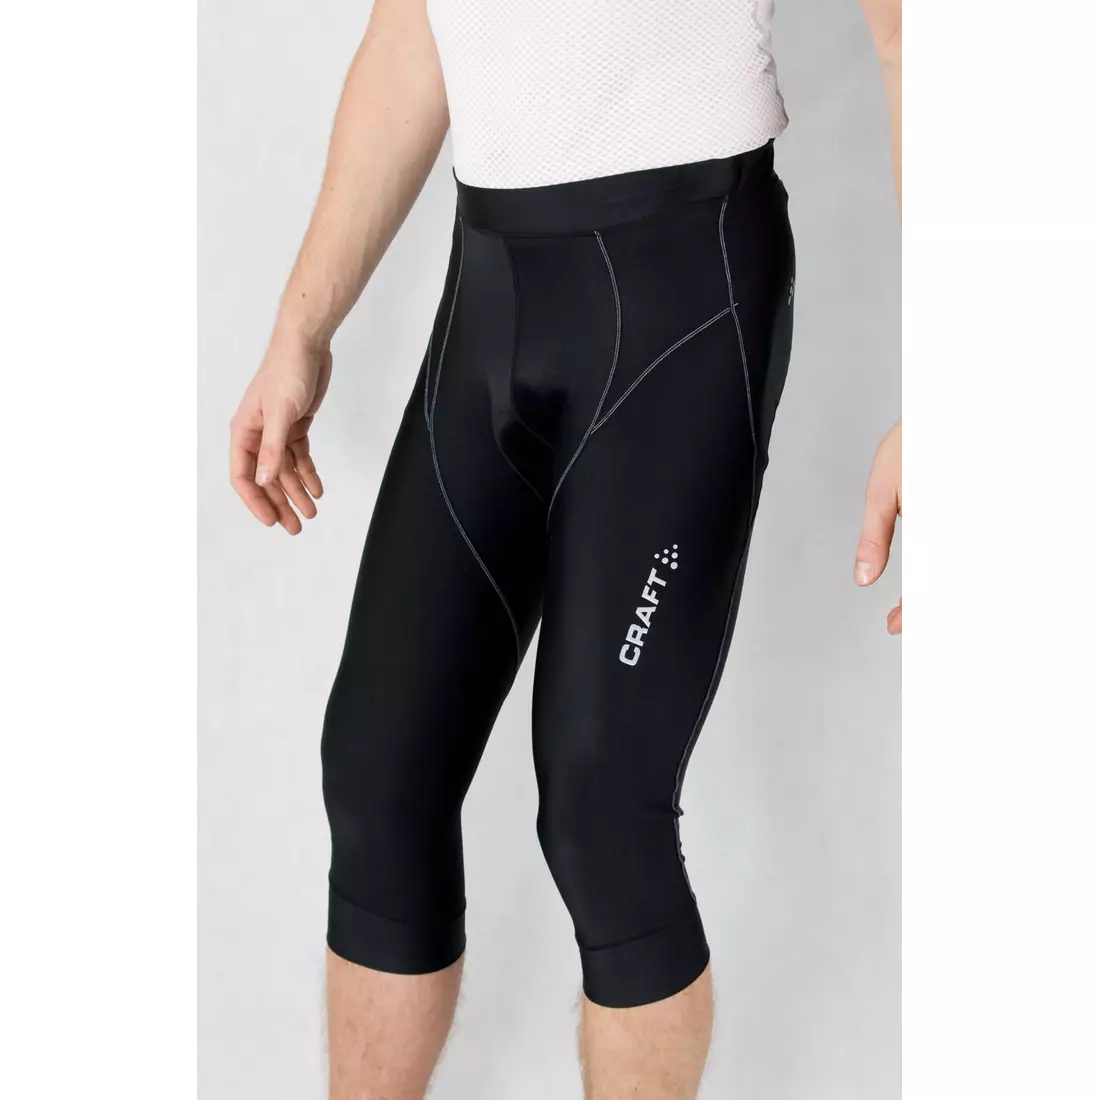 CRAFT Active Bike Knickers men's 3/4 cycling shorts 1901993-9900